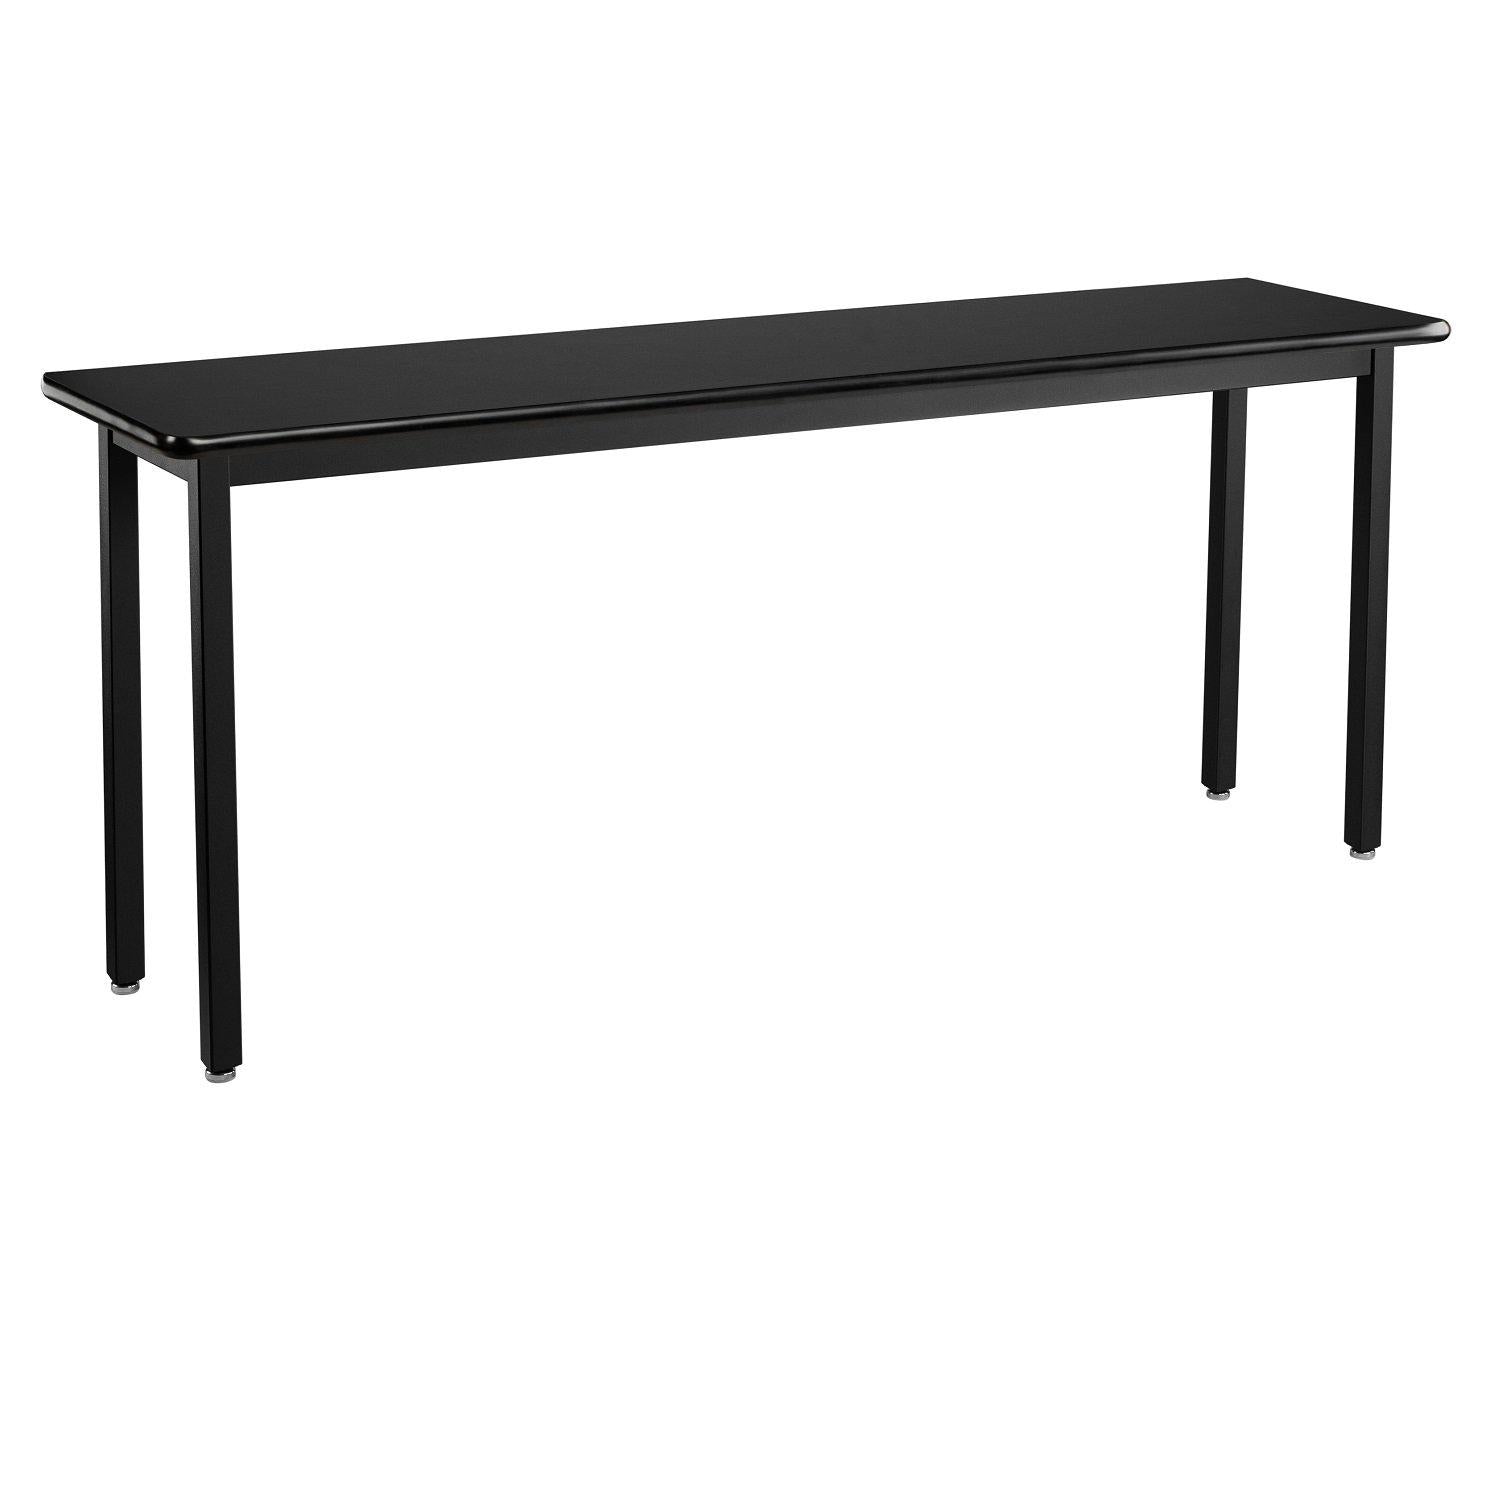 Heavy-Duty Fixed Height Utility Table, Black Frame, 18" x 84", High-Pressure Laminate Top with T-Mold Edge